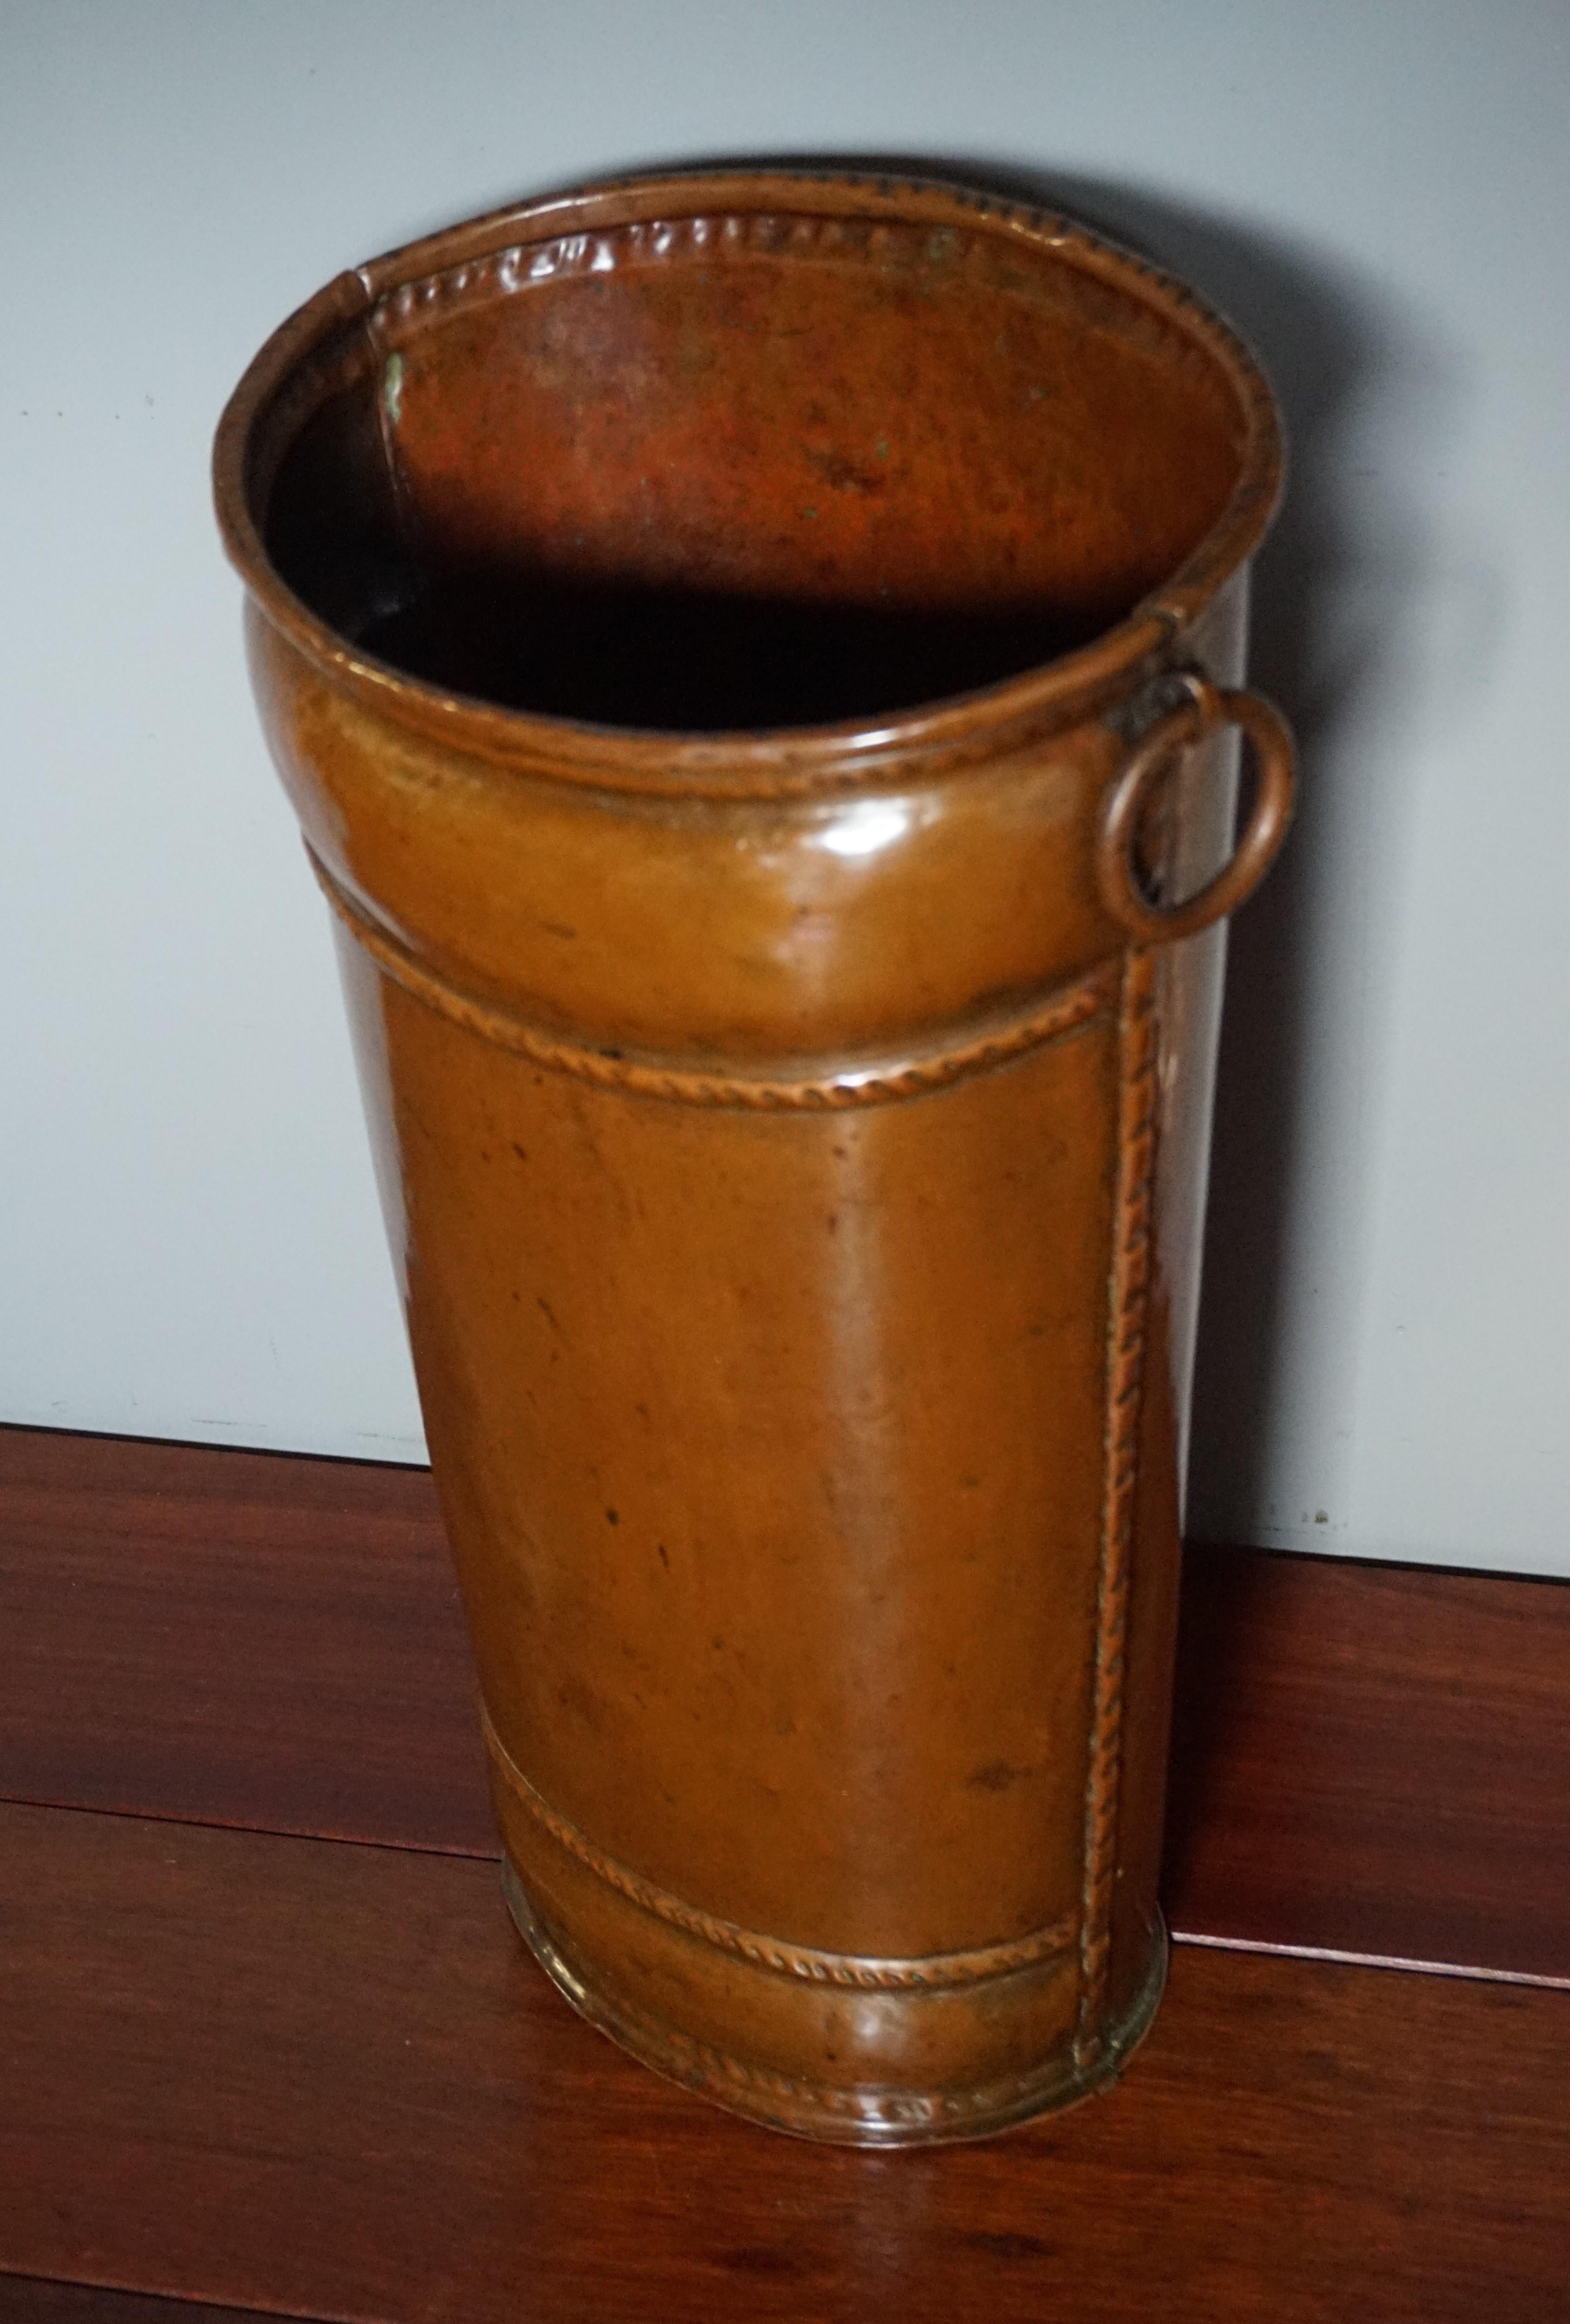 Late 1800s Handcrafted Copper Umbrella Stand Resembling Ancient Leather Bucket For Sale 2